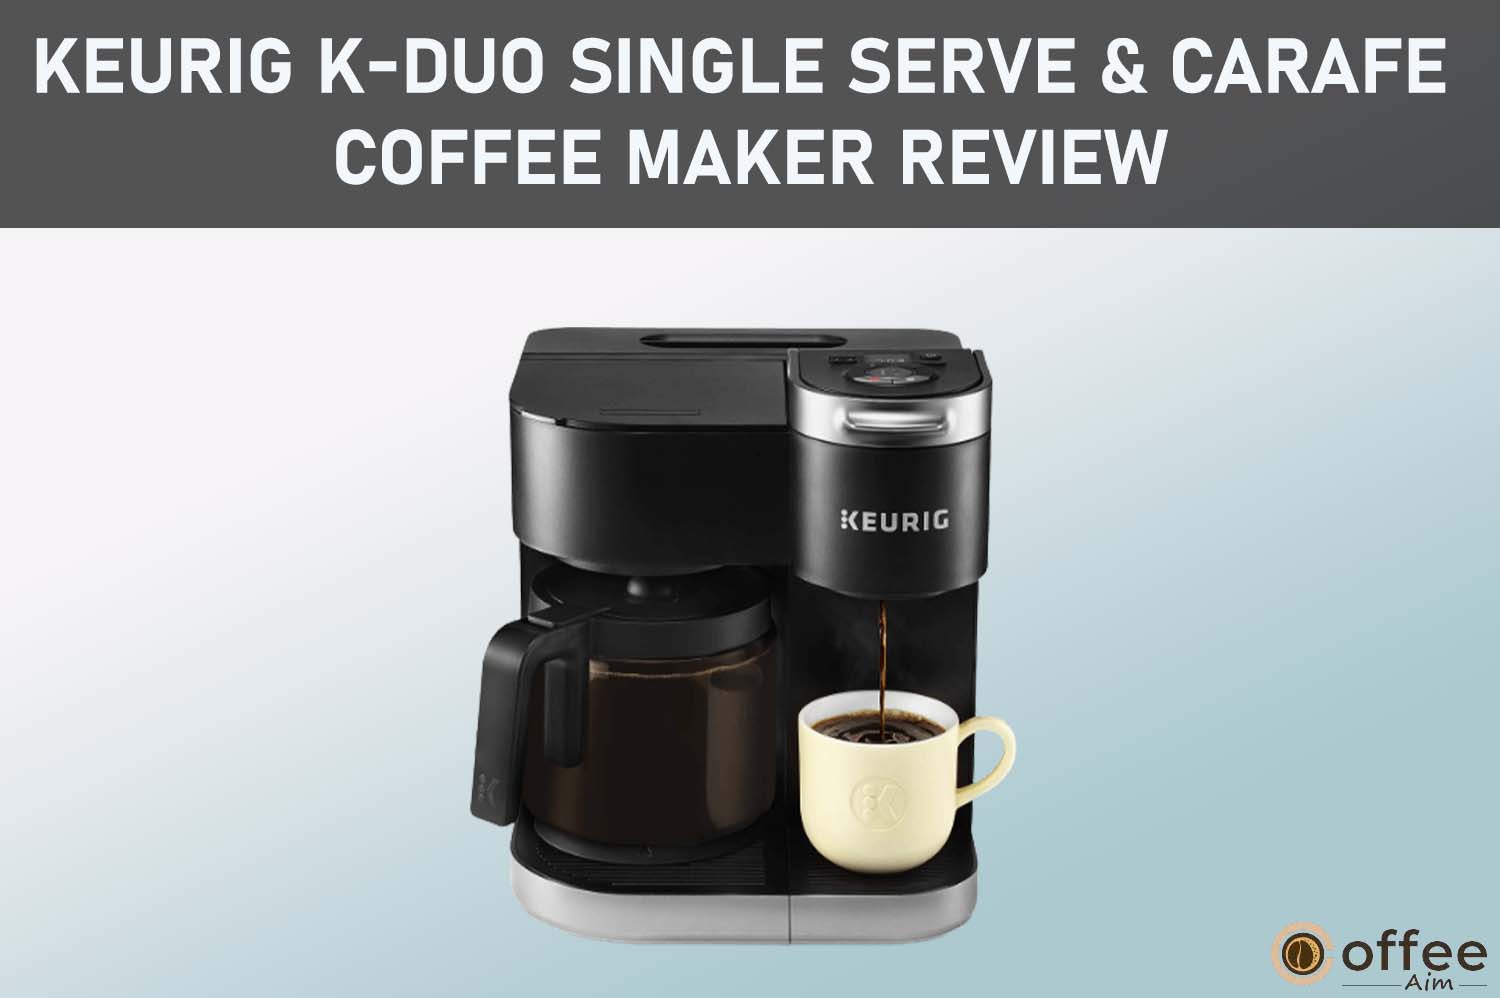 Featured image for the article "Keurig K-Duo Single Serve & Carafe Coffee Maker Review"